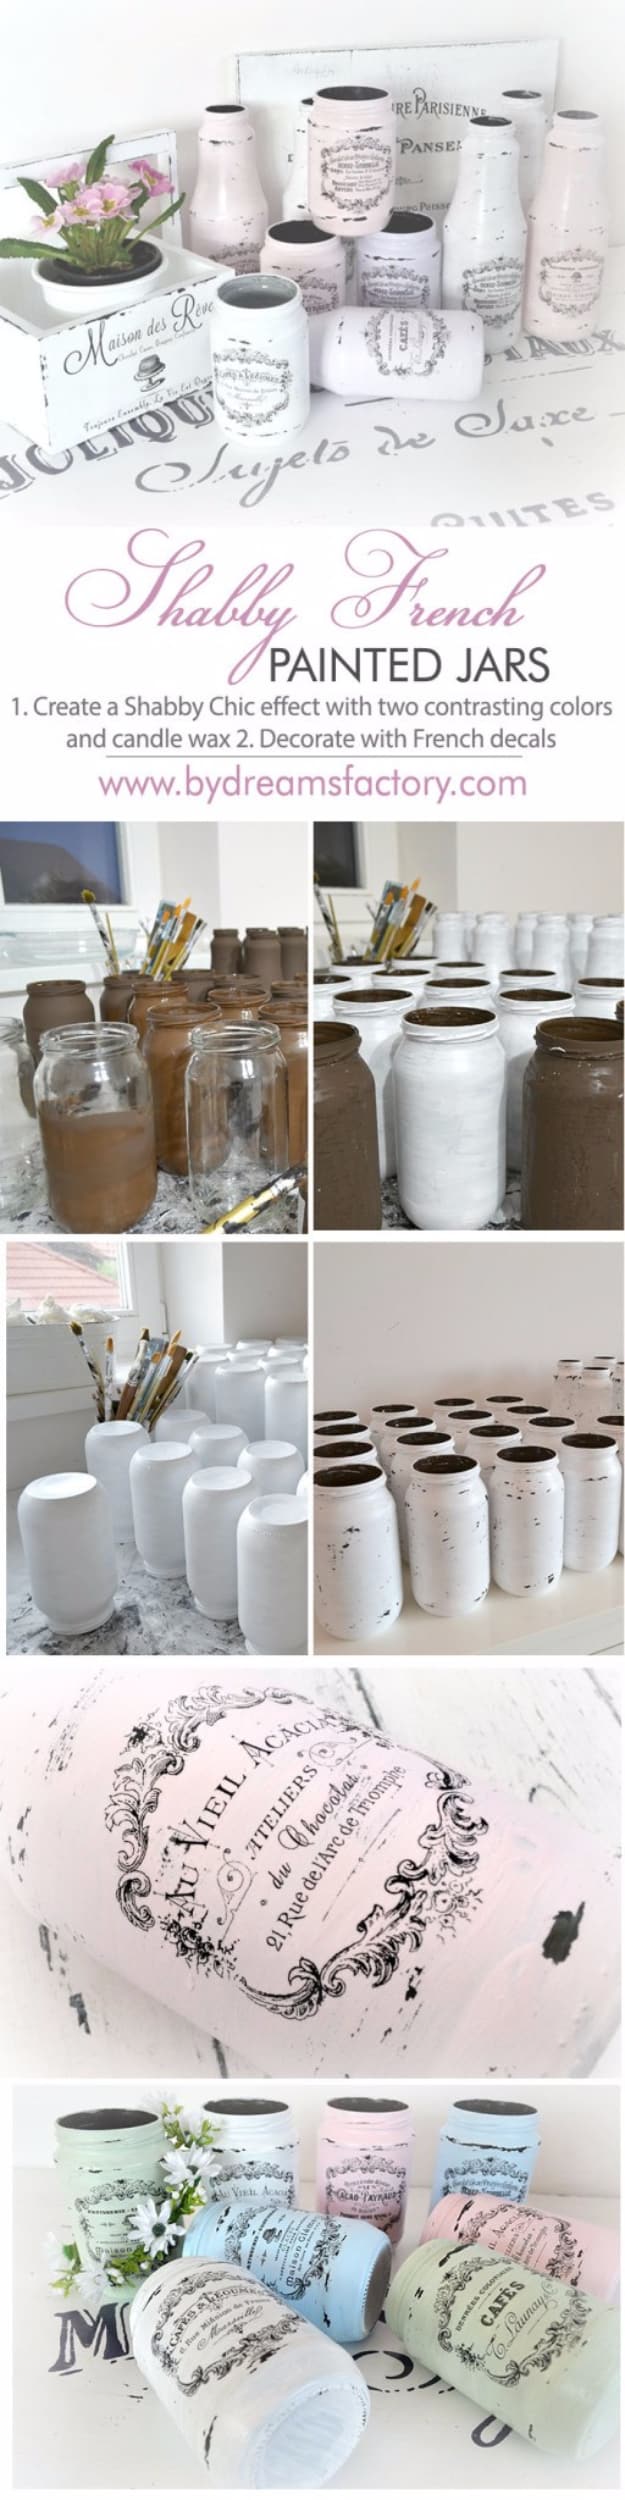 Shabby Chic Decor and Bedding Ideas - Shabby French Painted Jars - Rustic and Romantic Vintage Bedroom, Living Room and Kitchen Country Cottage Furniture and Home Decor Ideas. Step by Step Tutorials and Instructions 